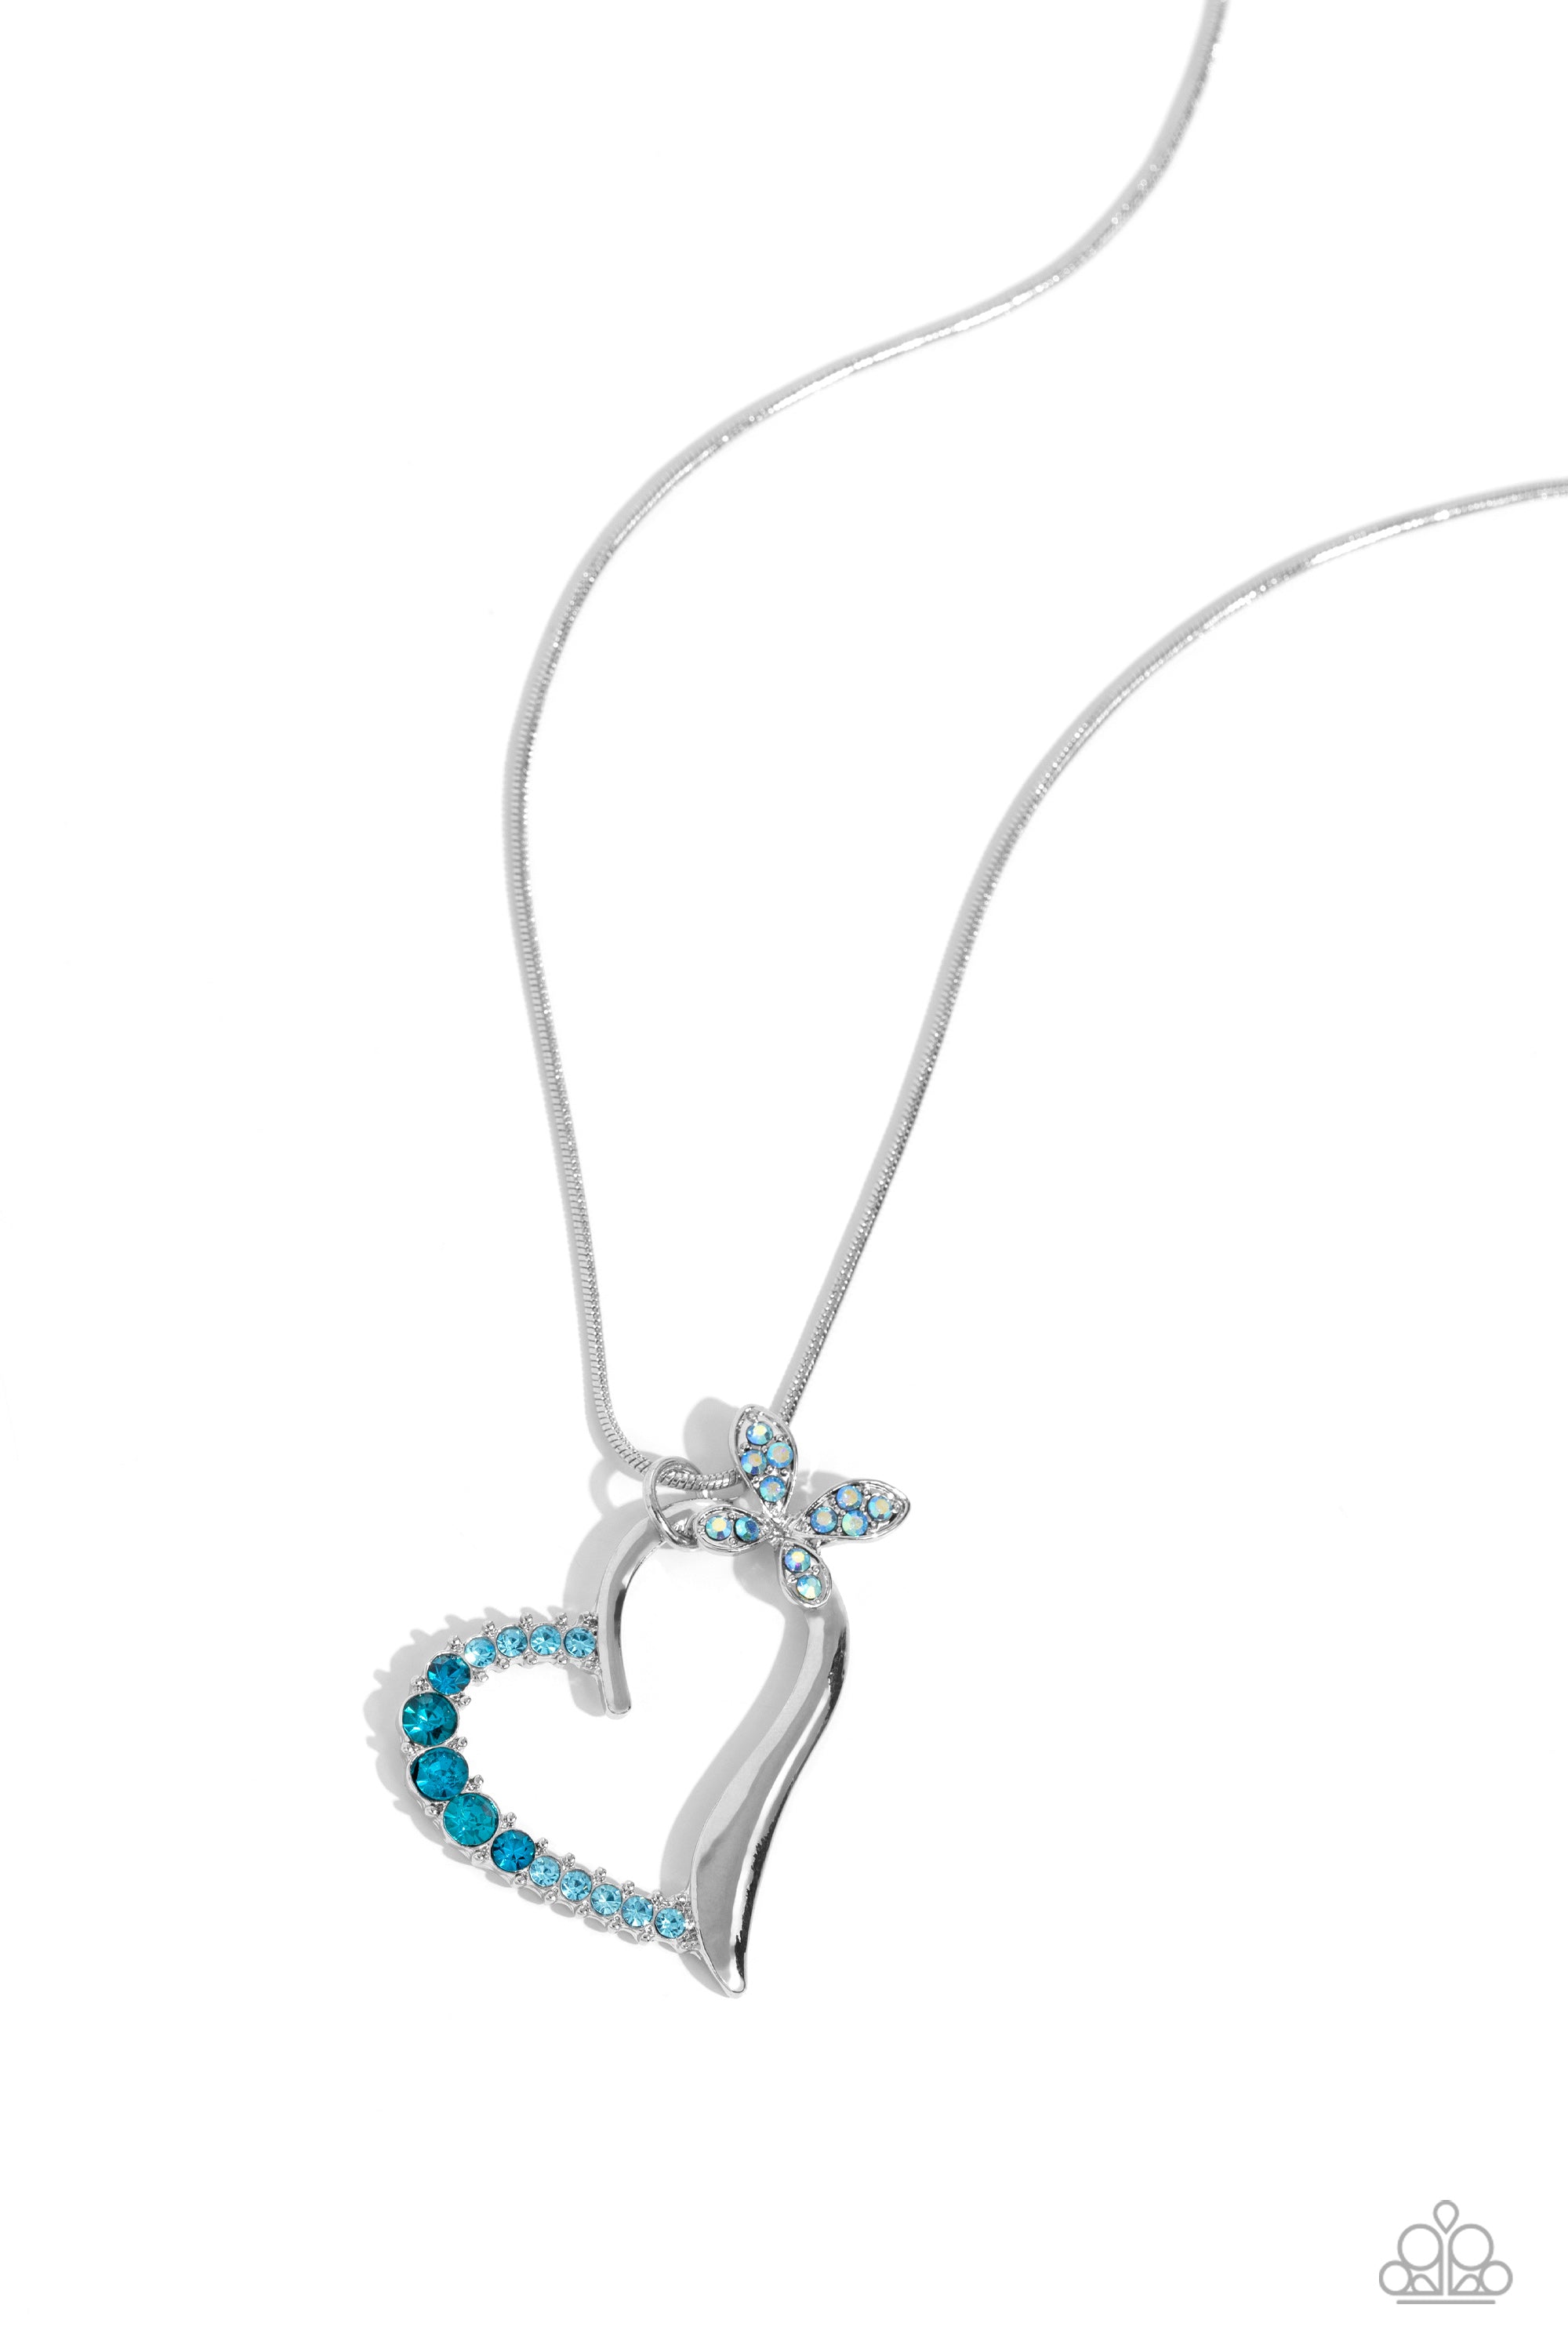 Paparazzi - Half-Hearted Haven - Necklace, Across the Constellations - Bracelet &amp; Starry Serenade - Ring